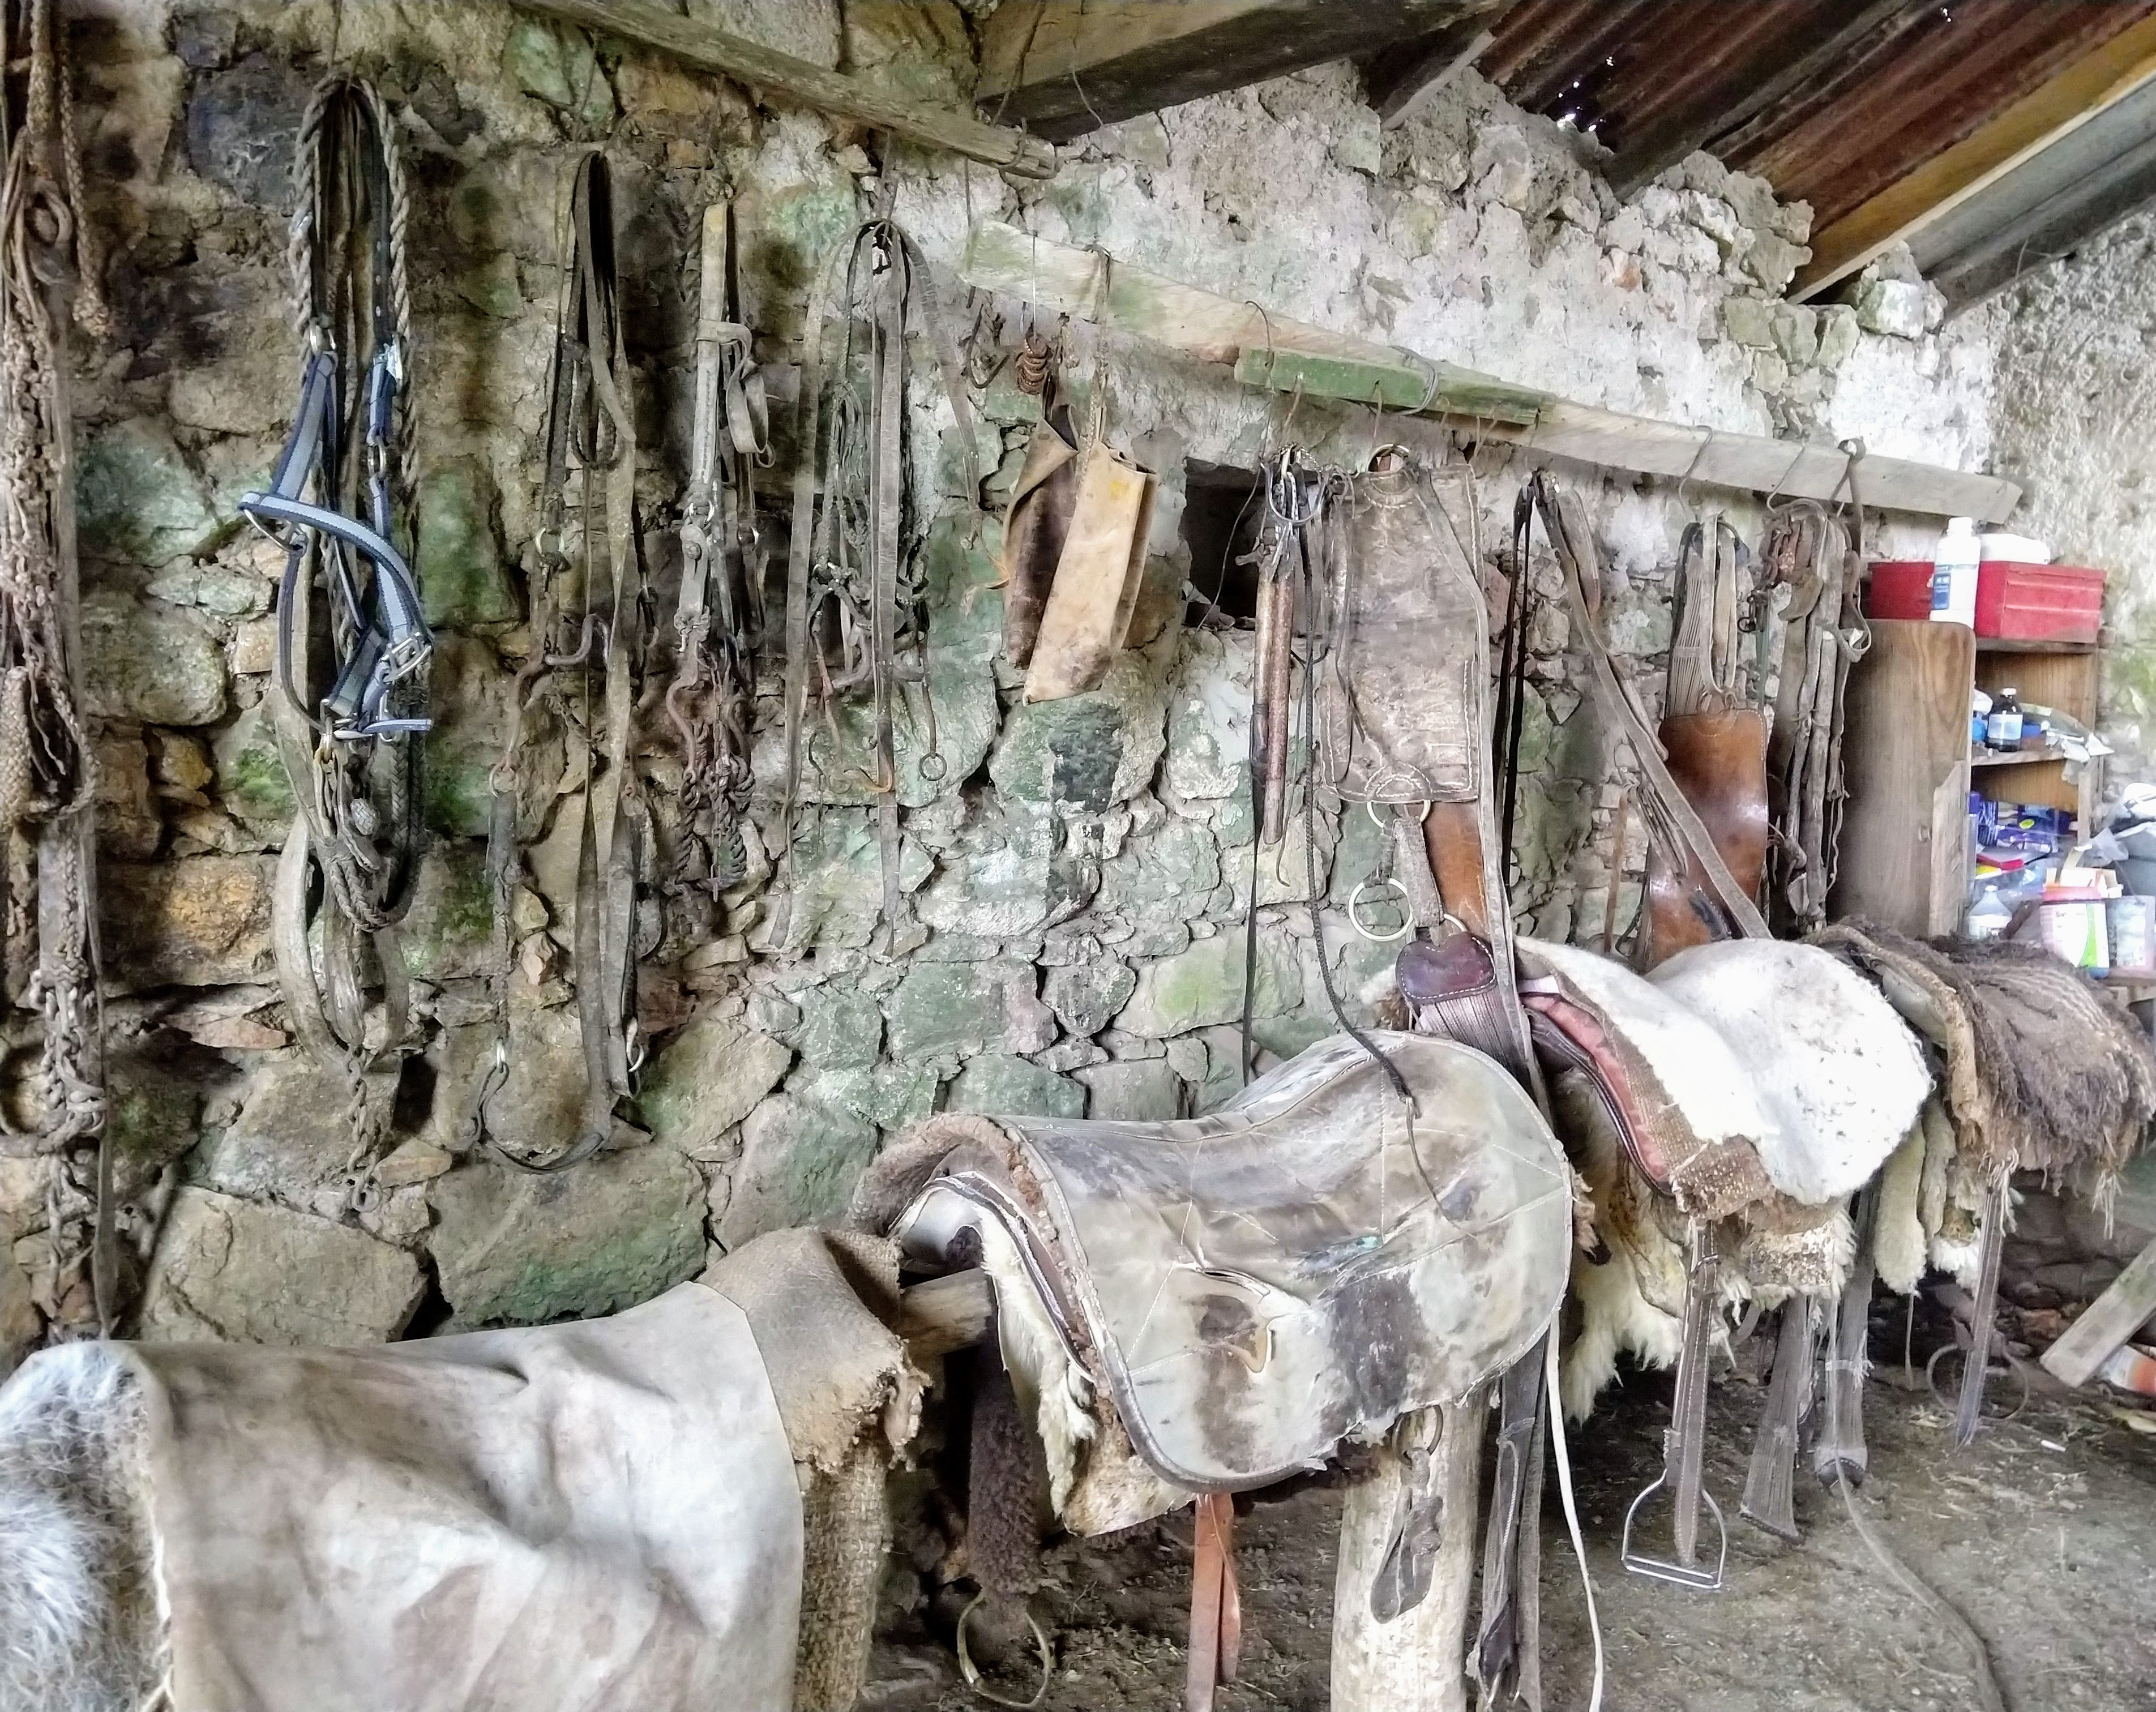 a row of saddles beneath a row of horse bridles and girth bands